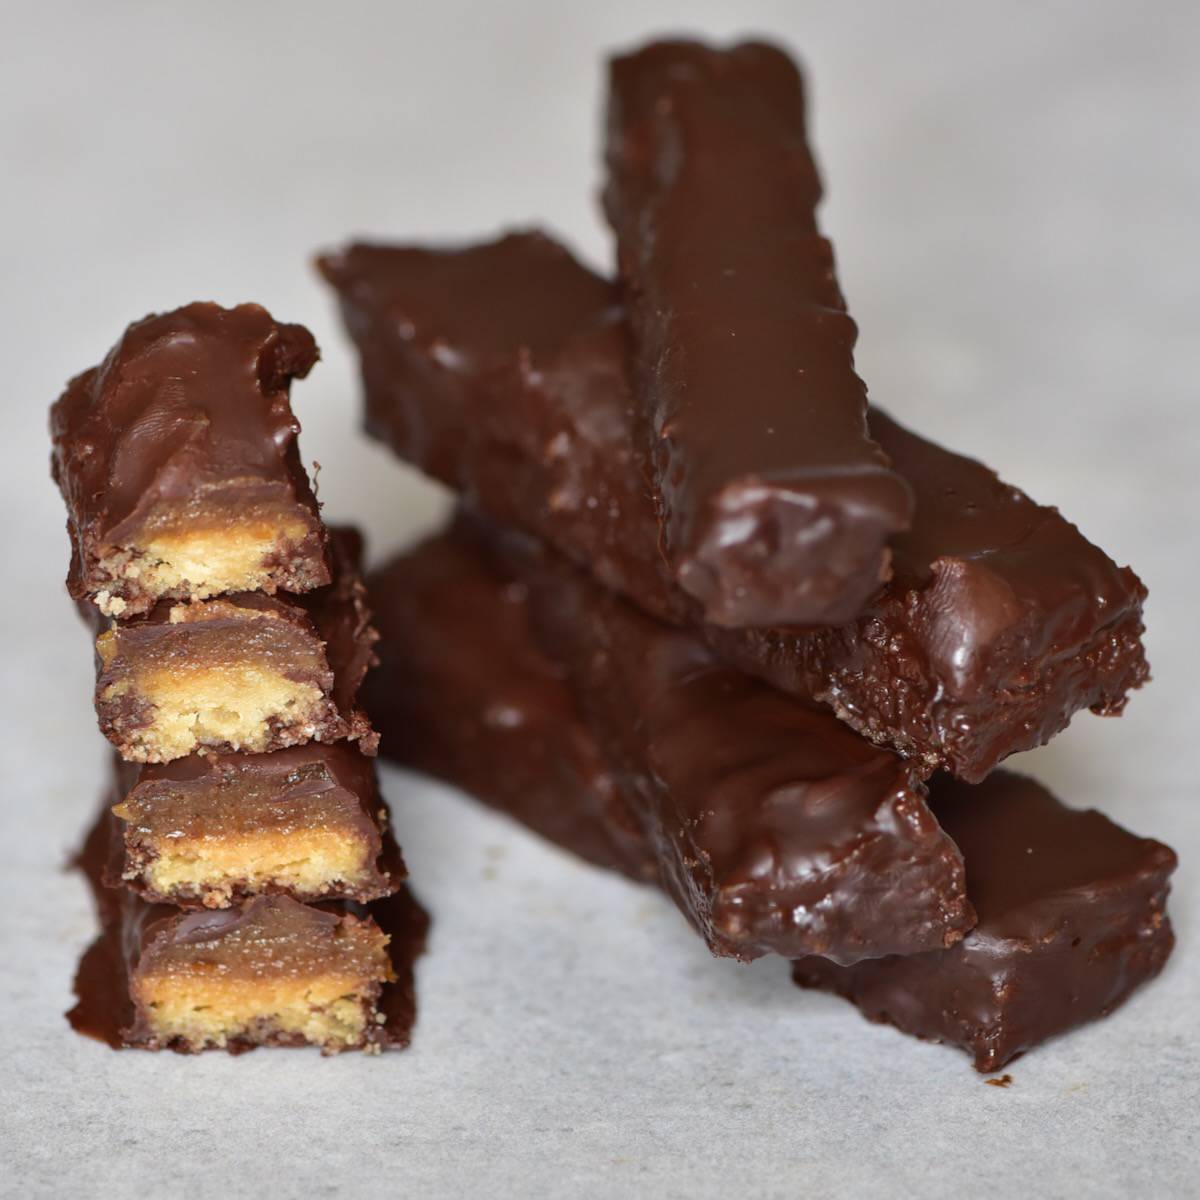 A stack of homemade twix bars